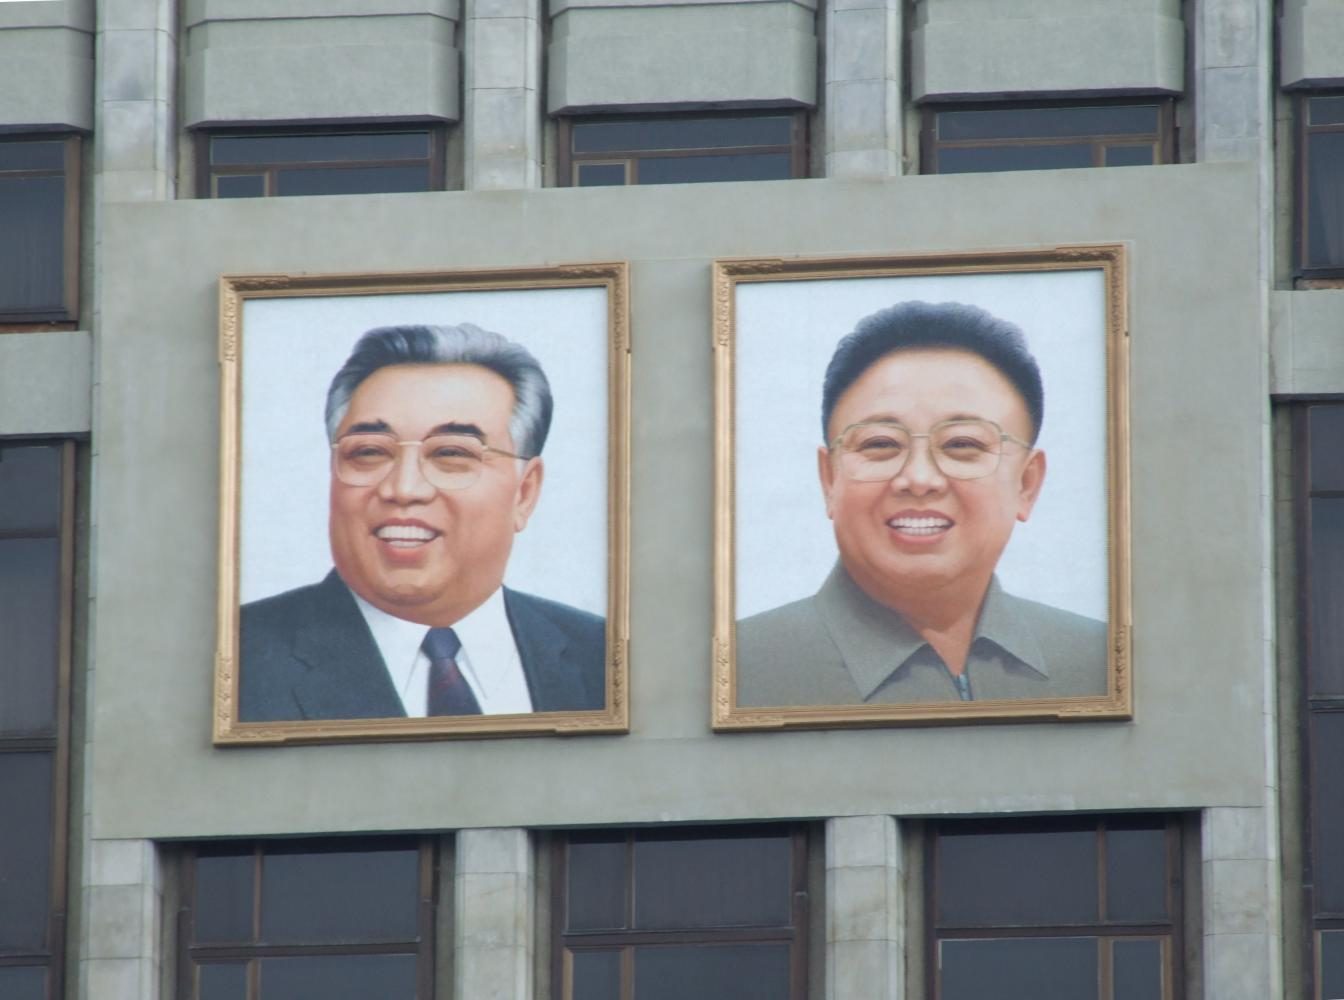 North Korea: a Nation Founded by Fear